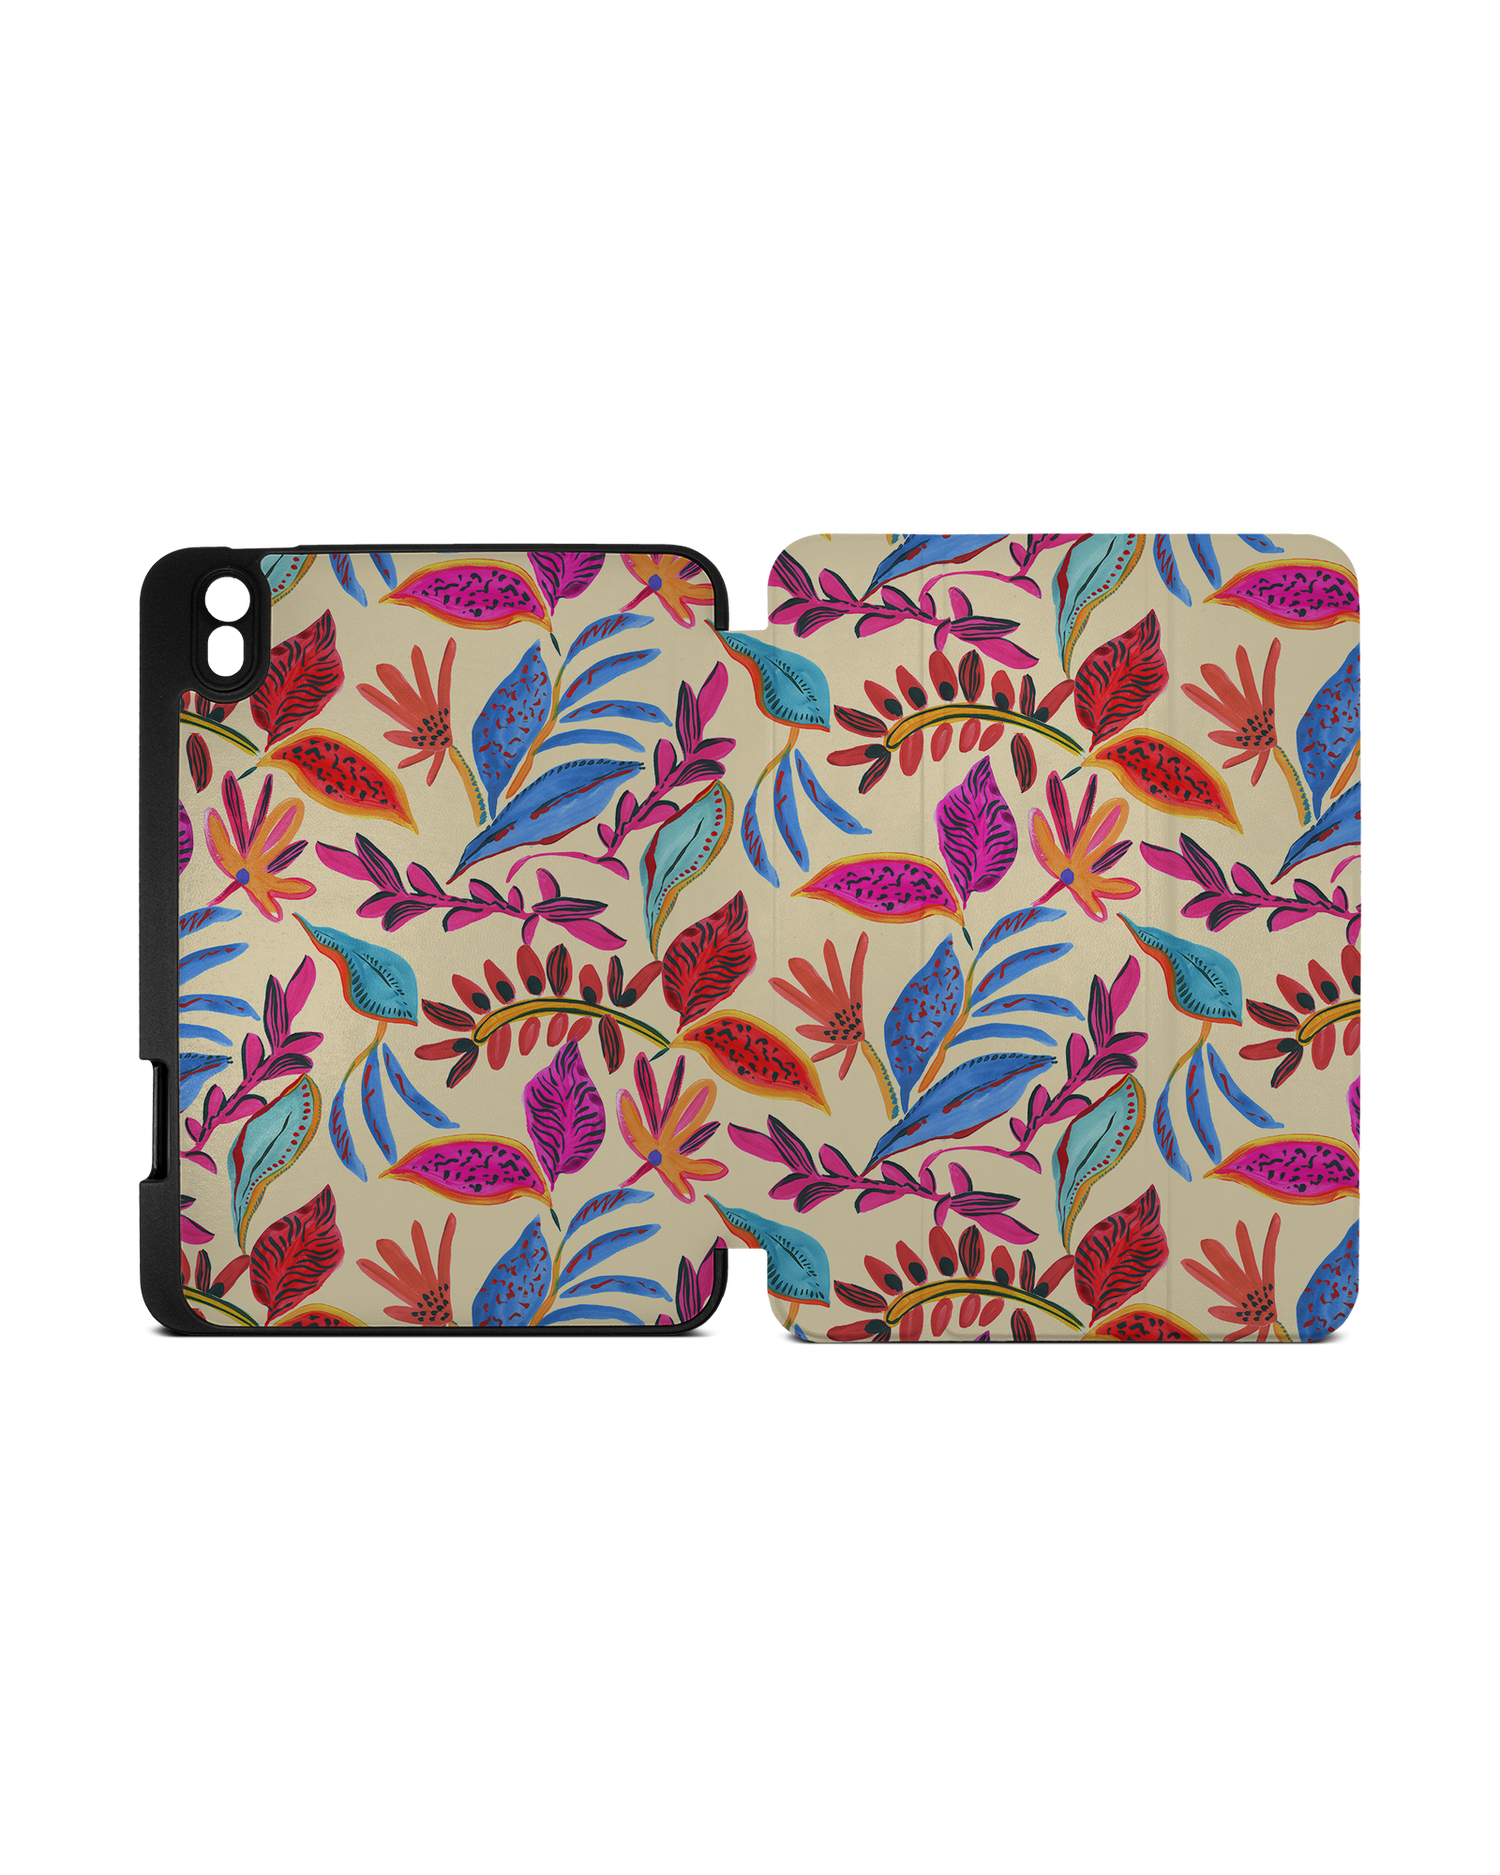 Painterly Spring Leaves iPad Case with Pencil Holder Apple iPad mini 6 (2021): Opened exterior view